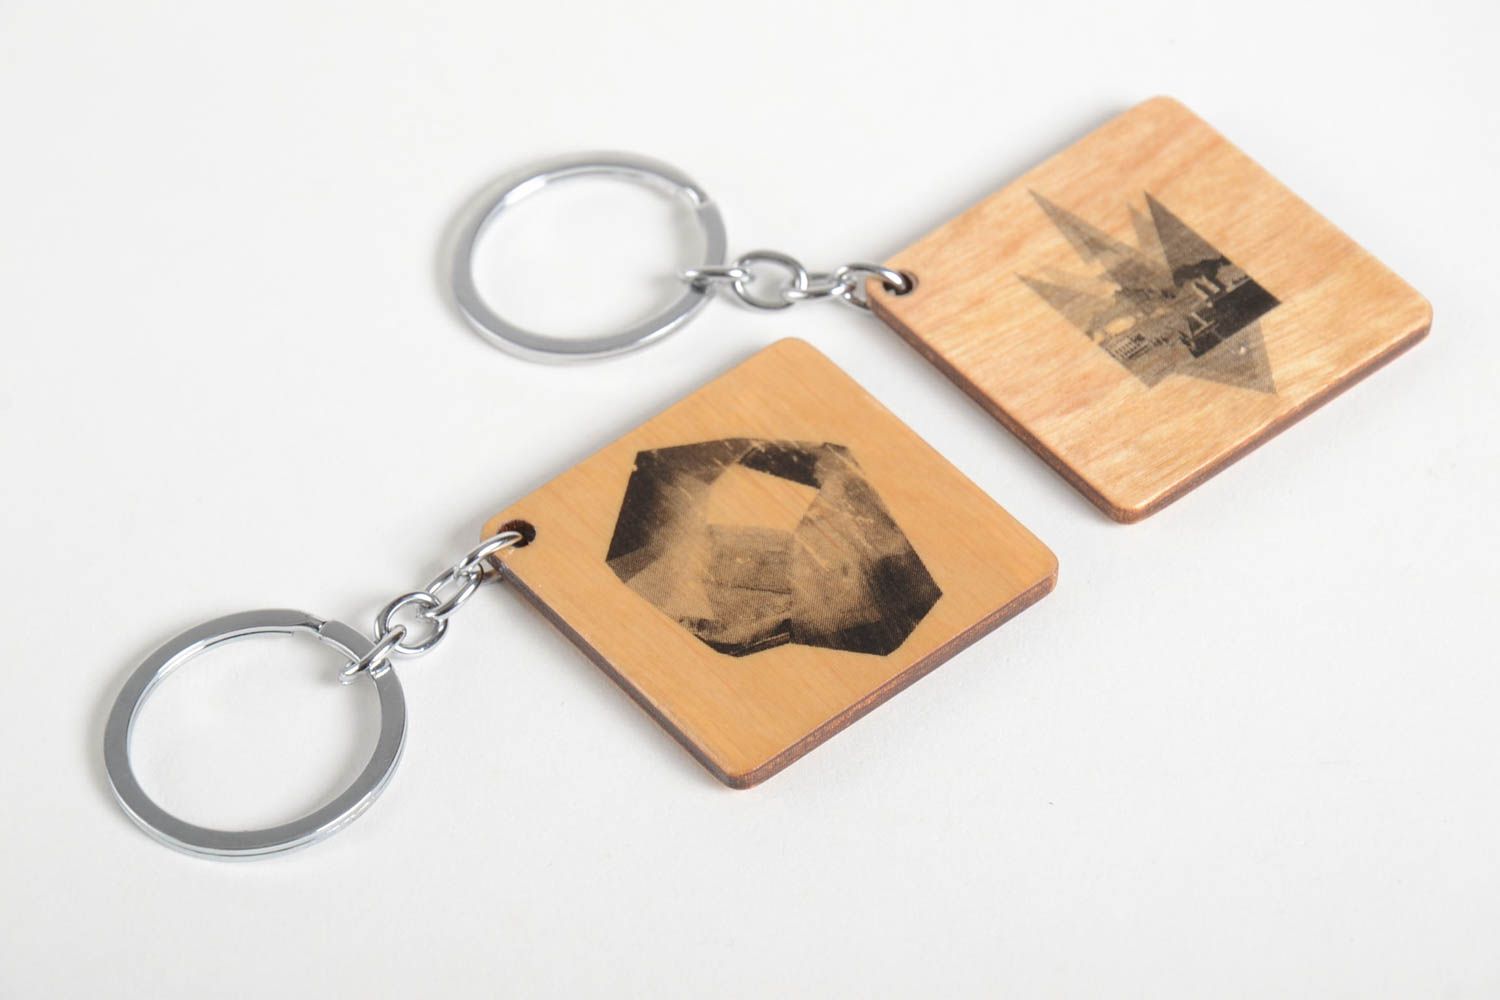 Handmade keychains set of 2 products wooden souvenir unusual gift ideas photo 5